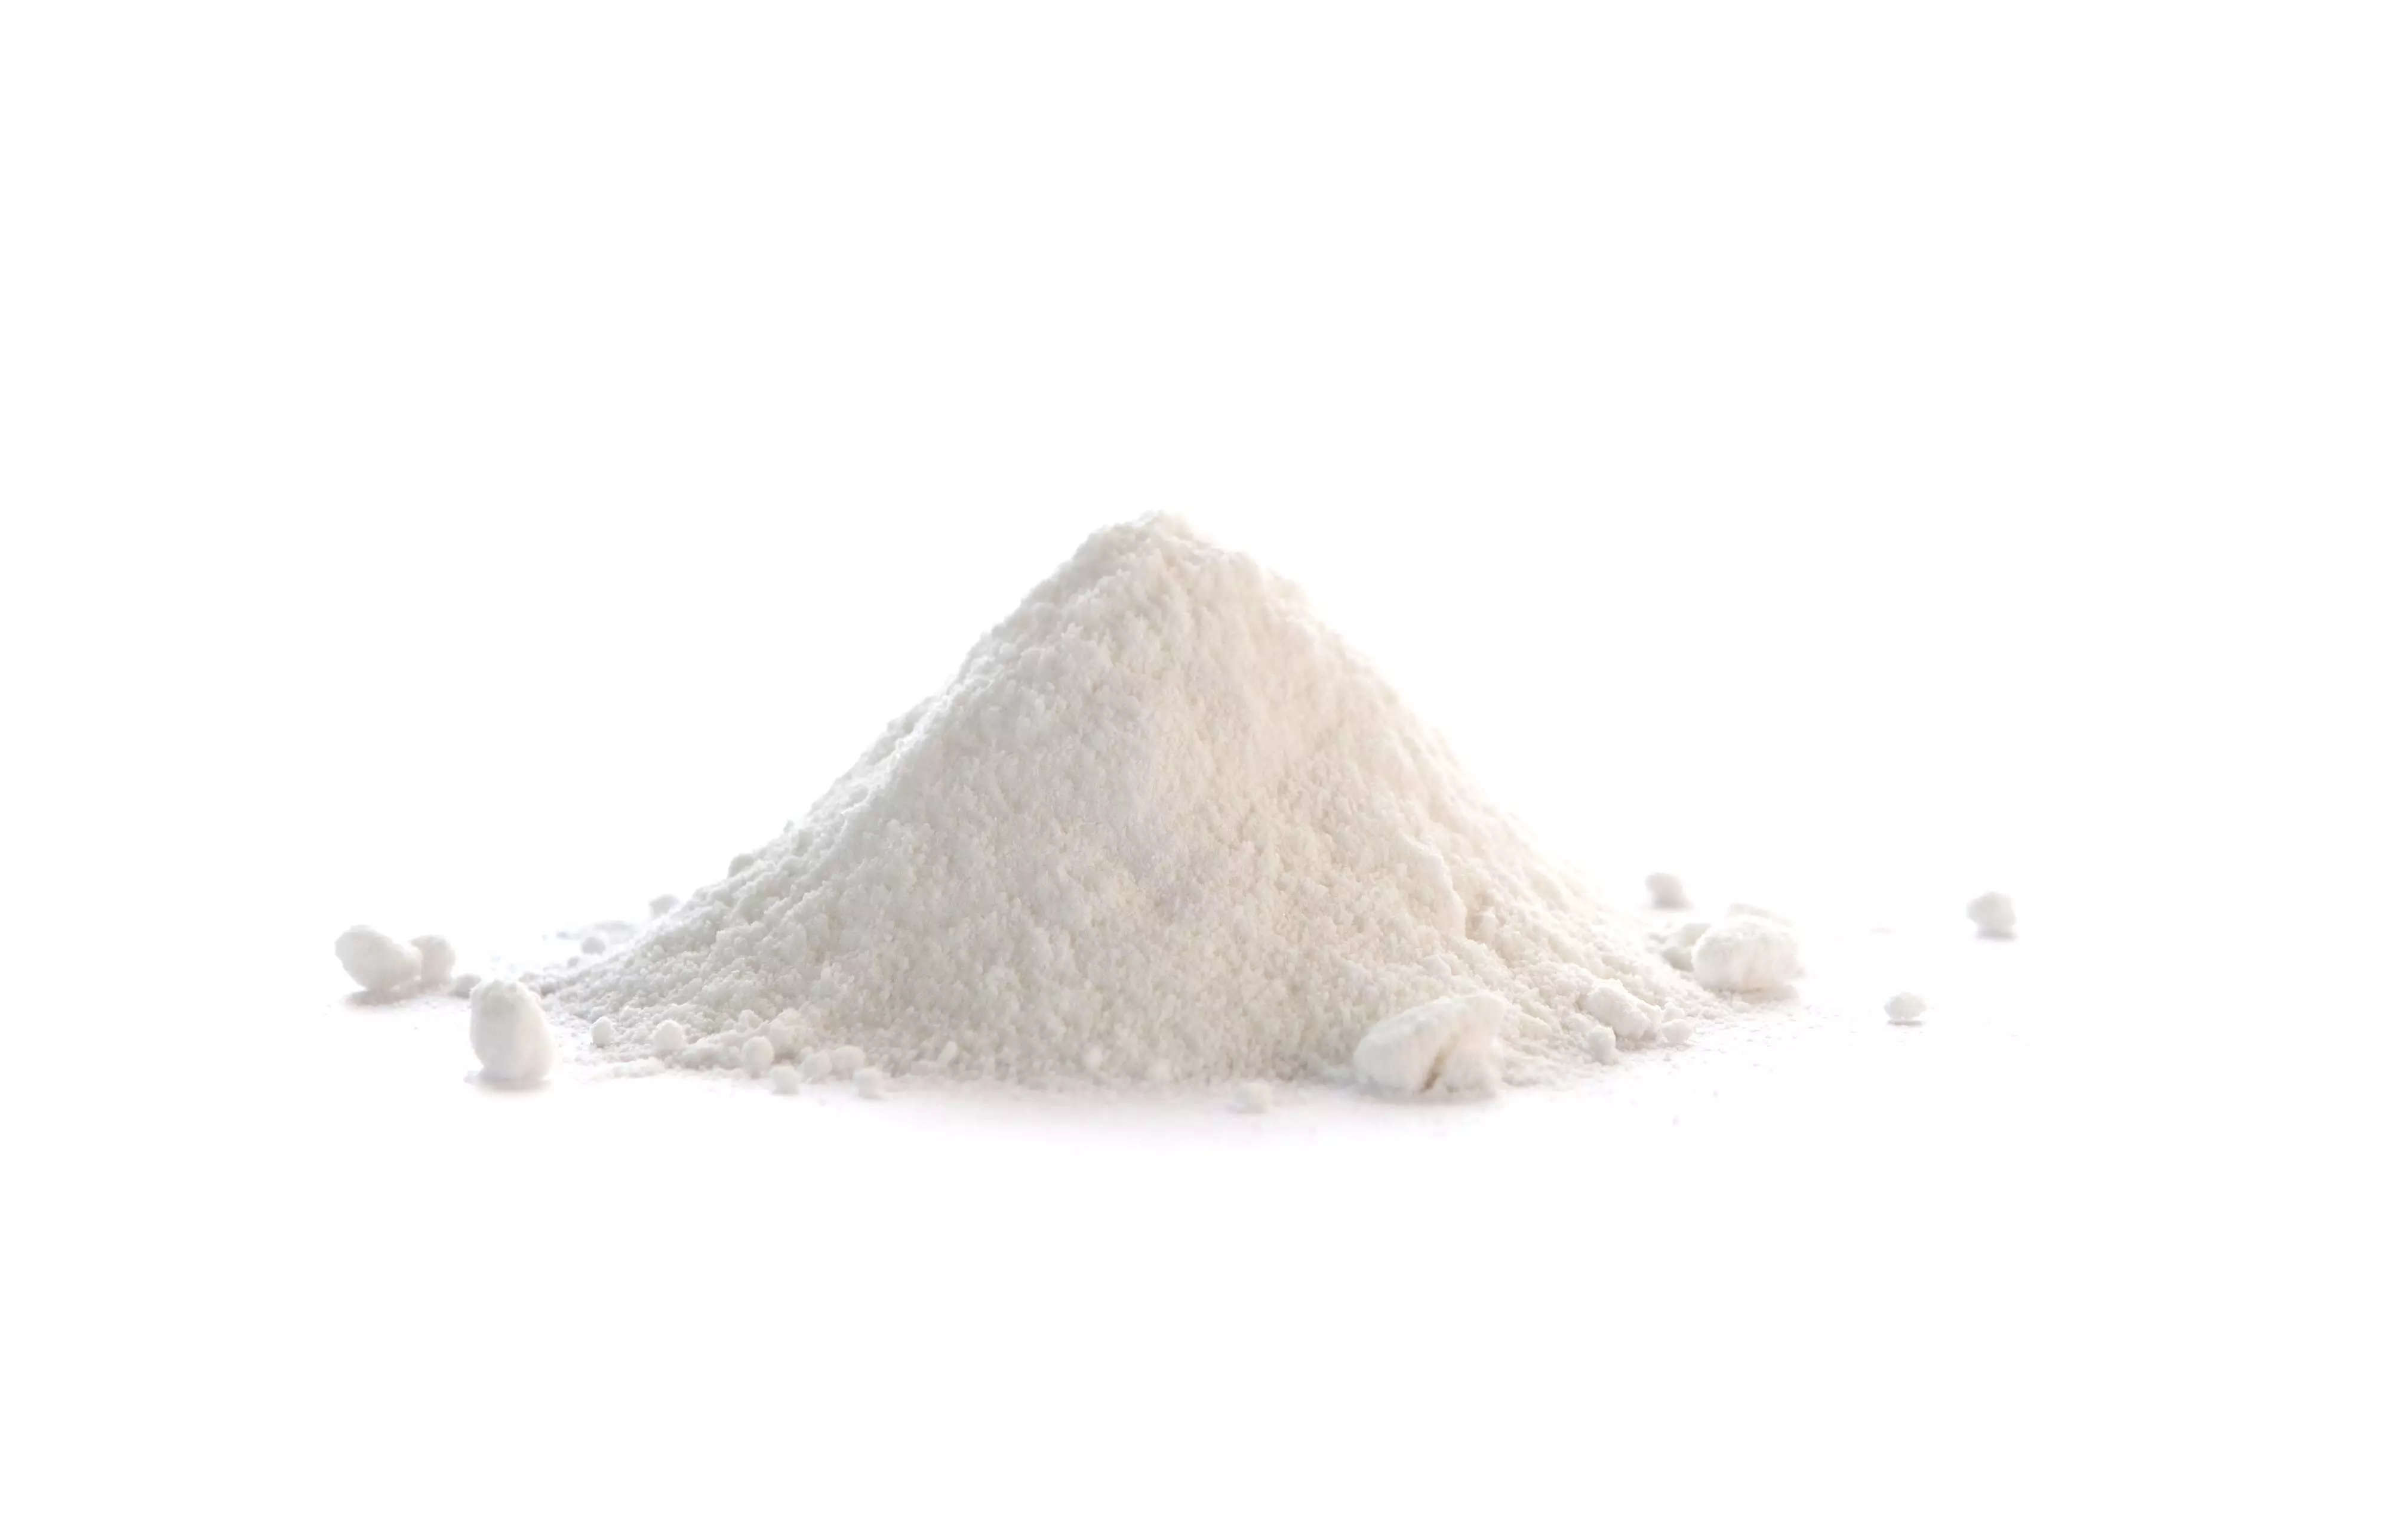 A pile of d-mannose. D-mannose is a white, fine type of sugar.